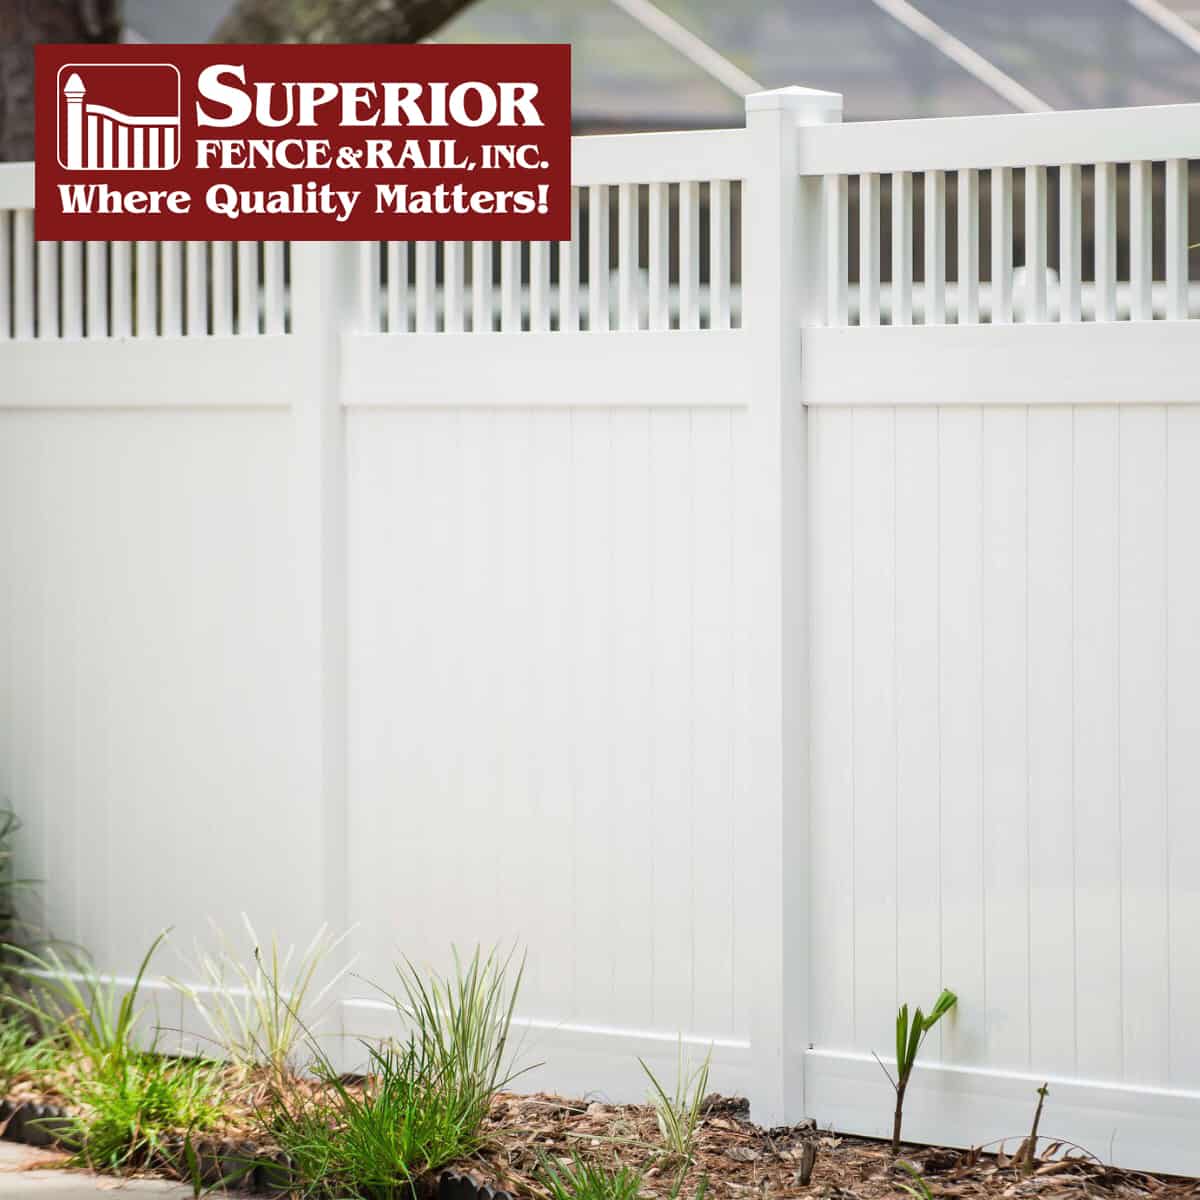 https://www.superiorfenceandrail.com/wp-content/uploads/2022/05/Eagle-Mountain-Fence-Company-Contractor.jpg